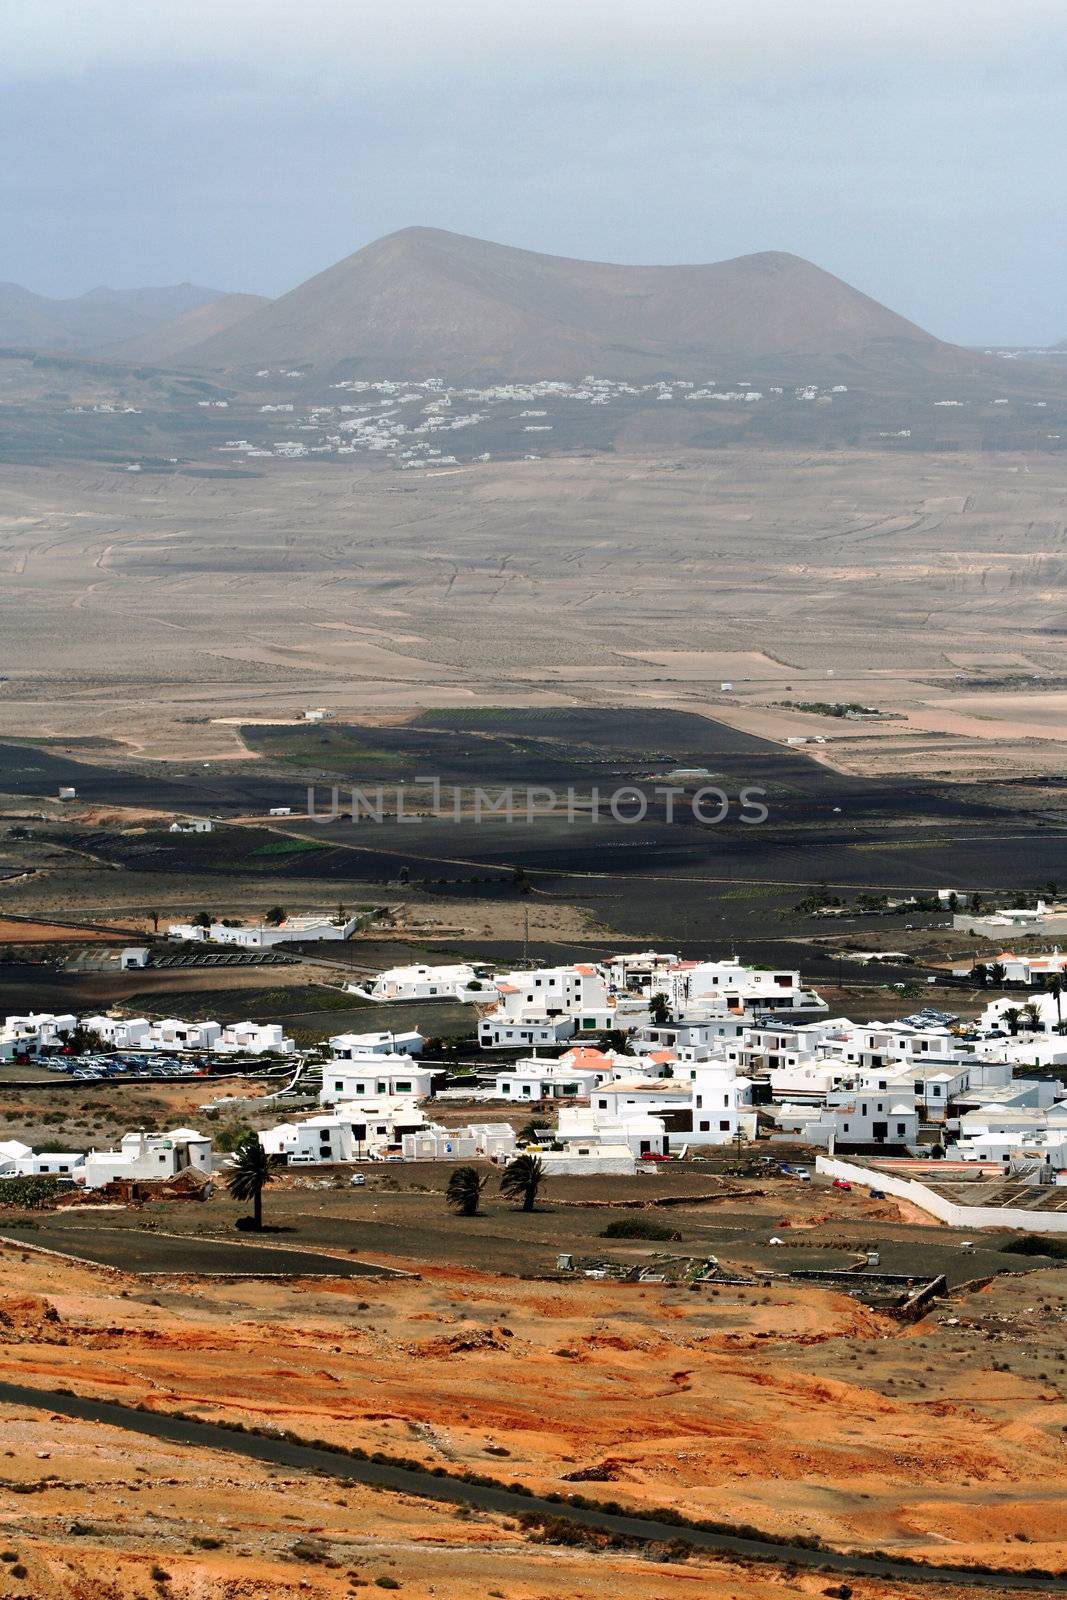 Landscape view from the isle of Lanzarote, Canarias.